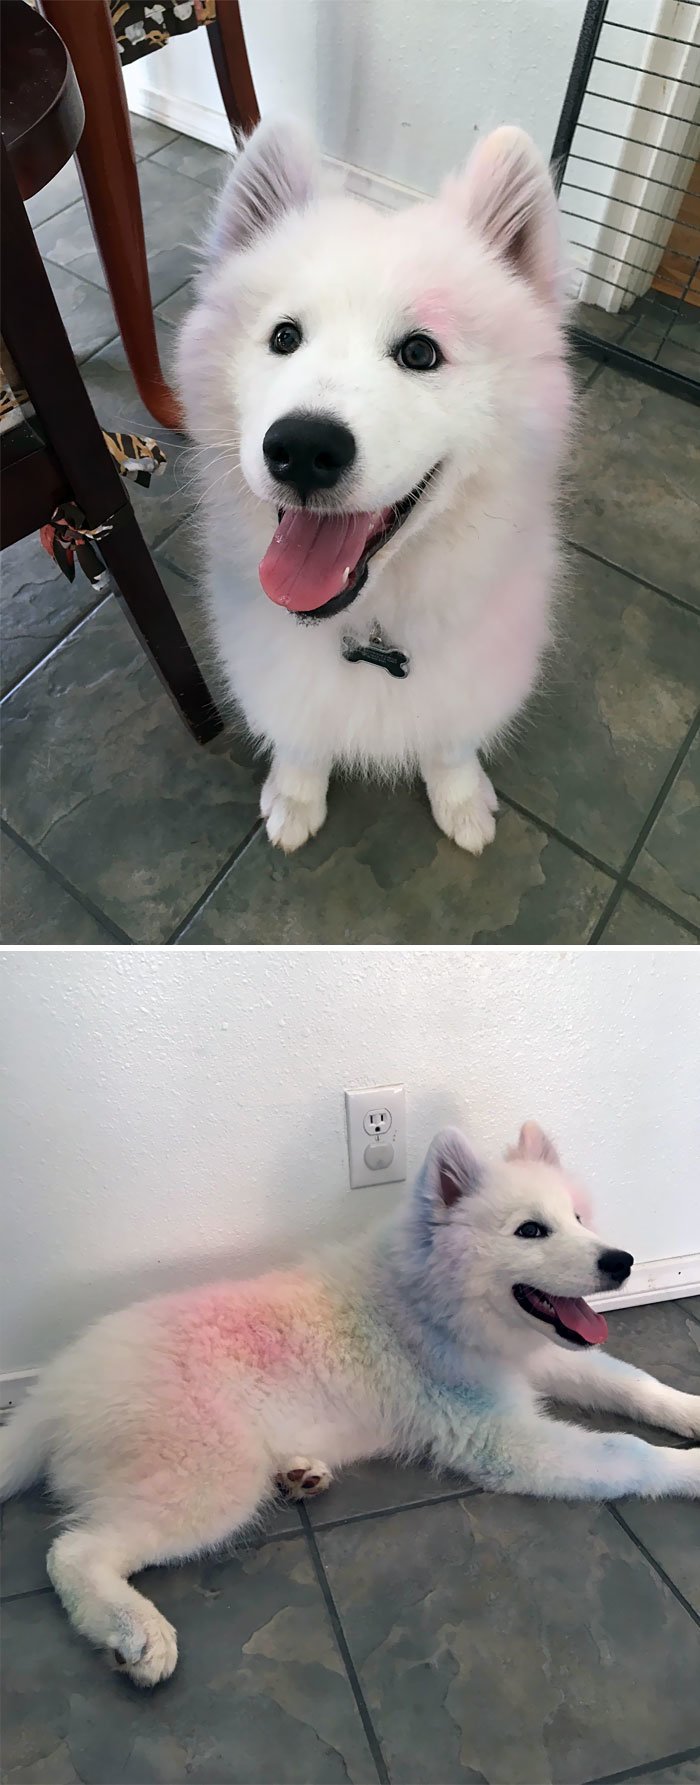 two photos of Samoyed Dog with its fur dyed in rainbow colors sitting and lying down on the floor